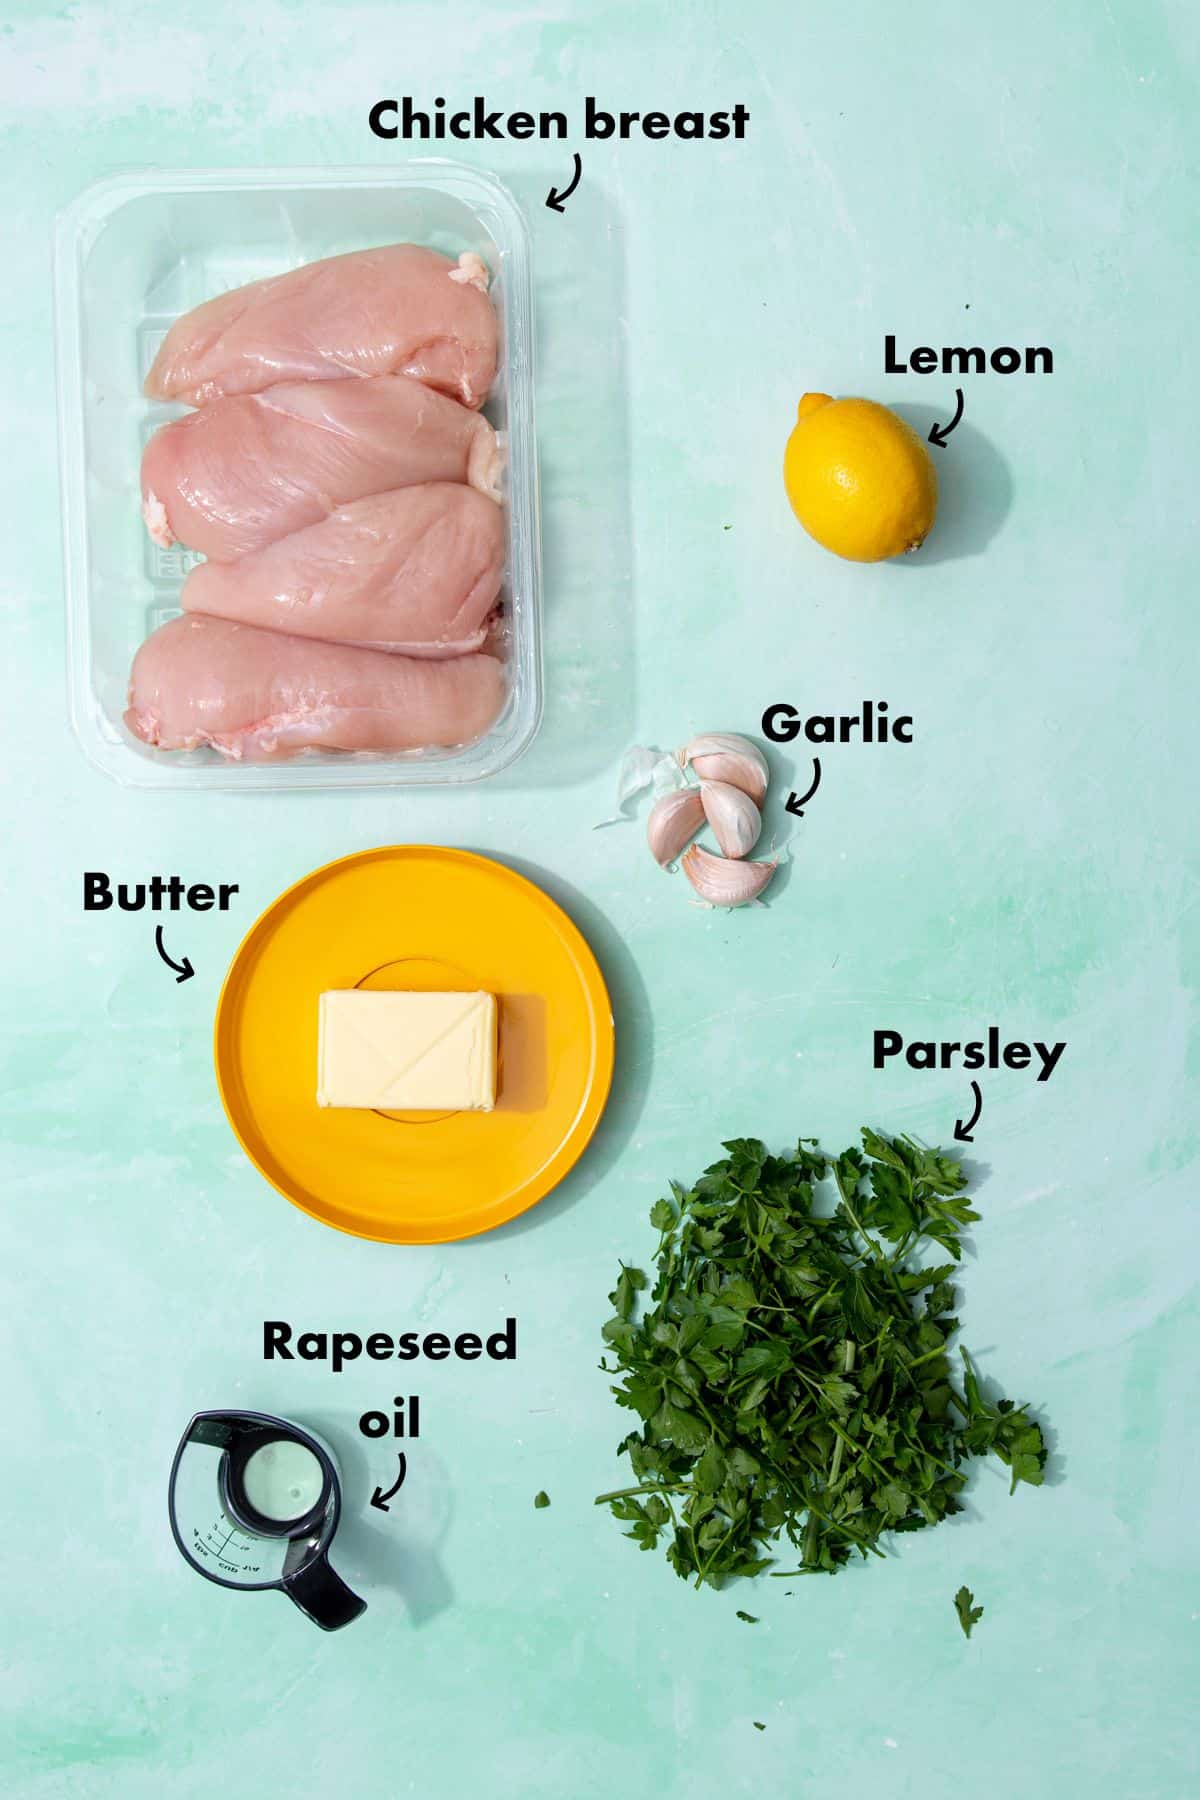 Ingredients to make the chicken with garlic butter laid out on a pale blue back ground.